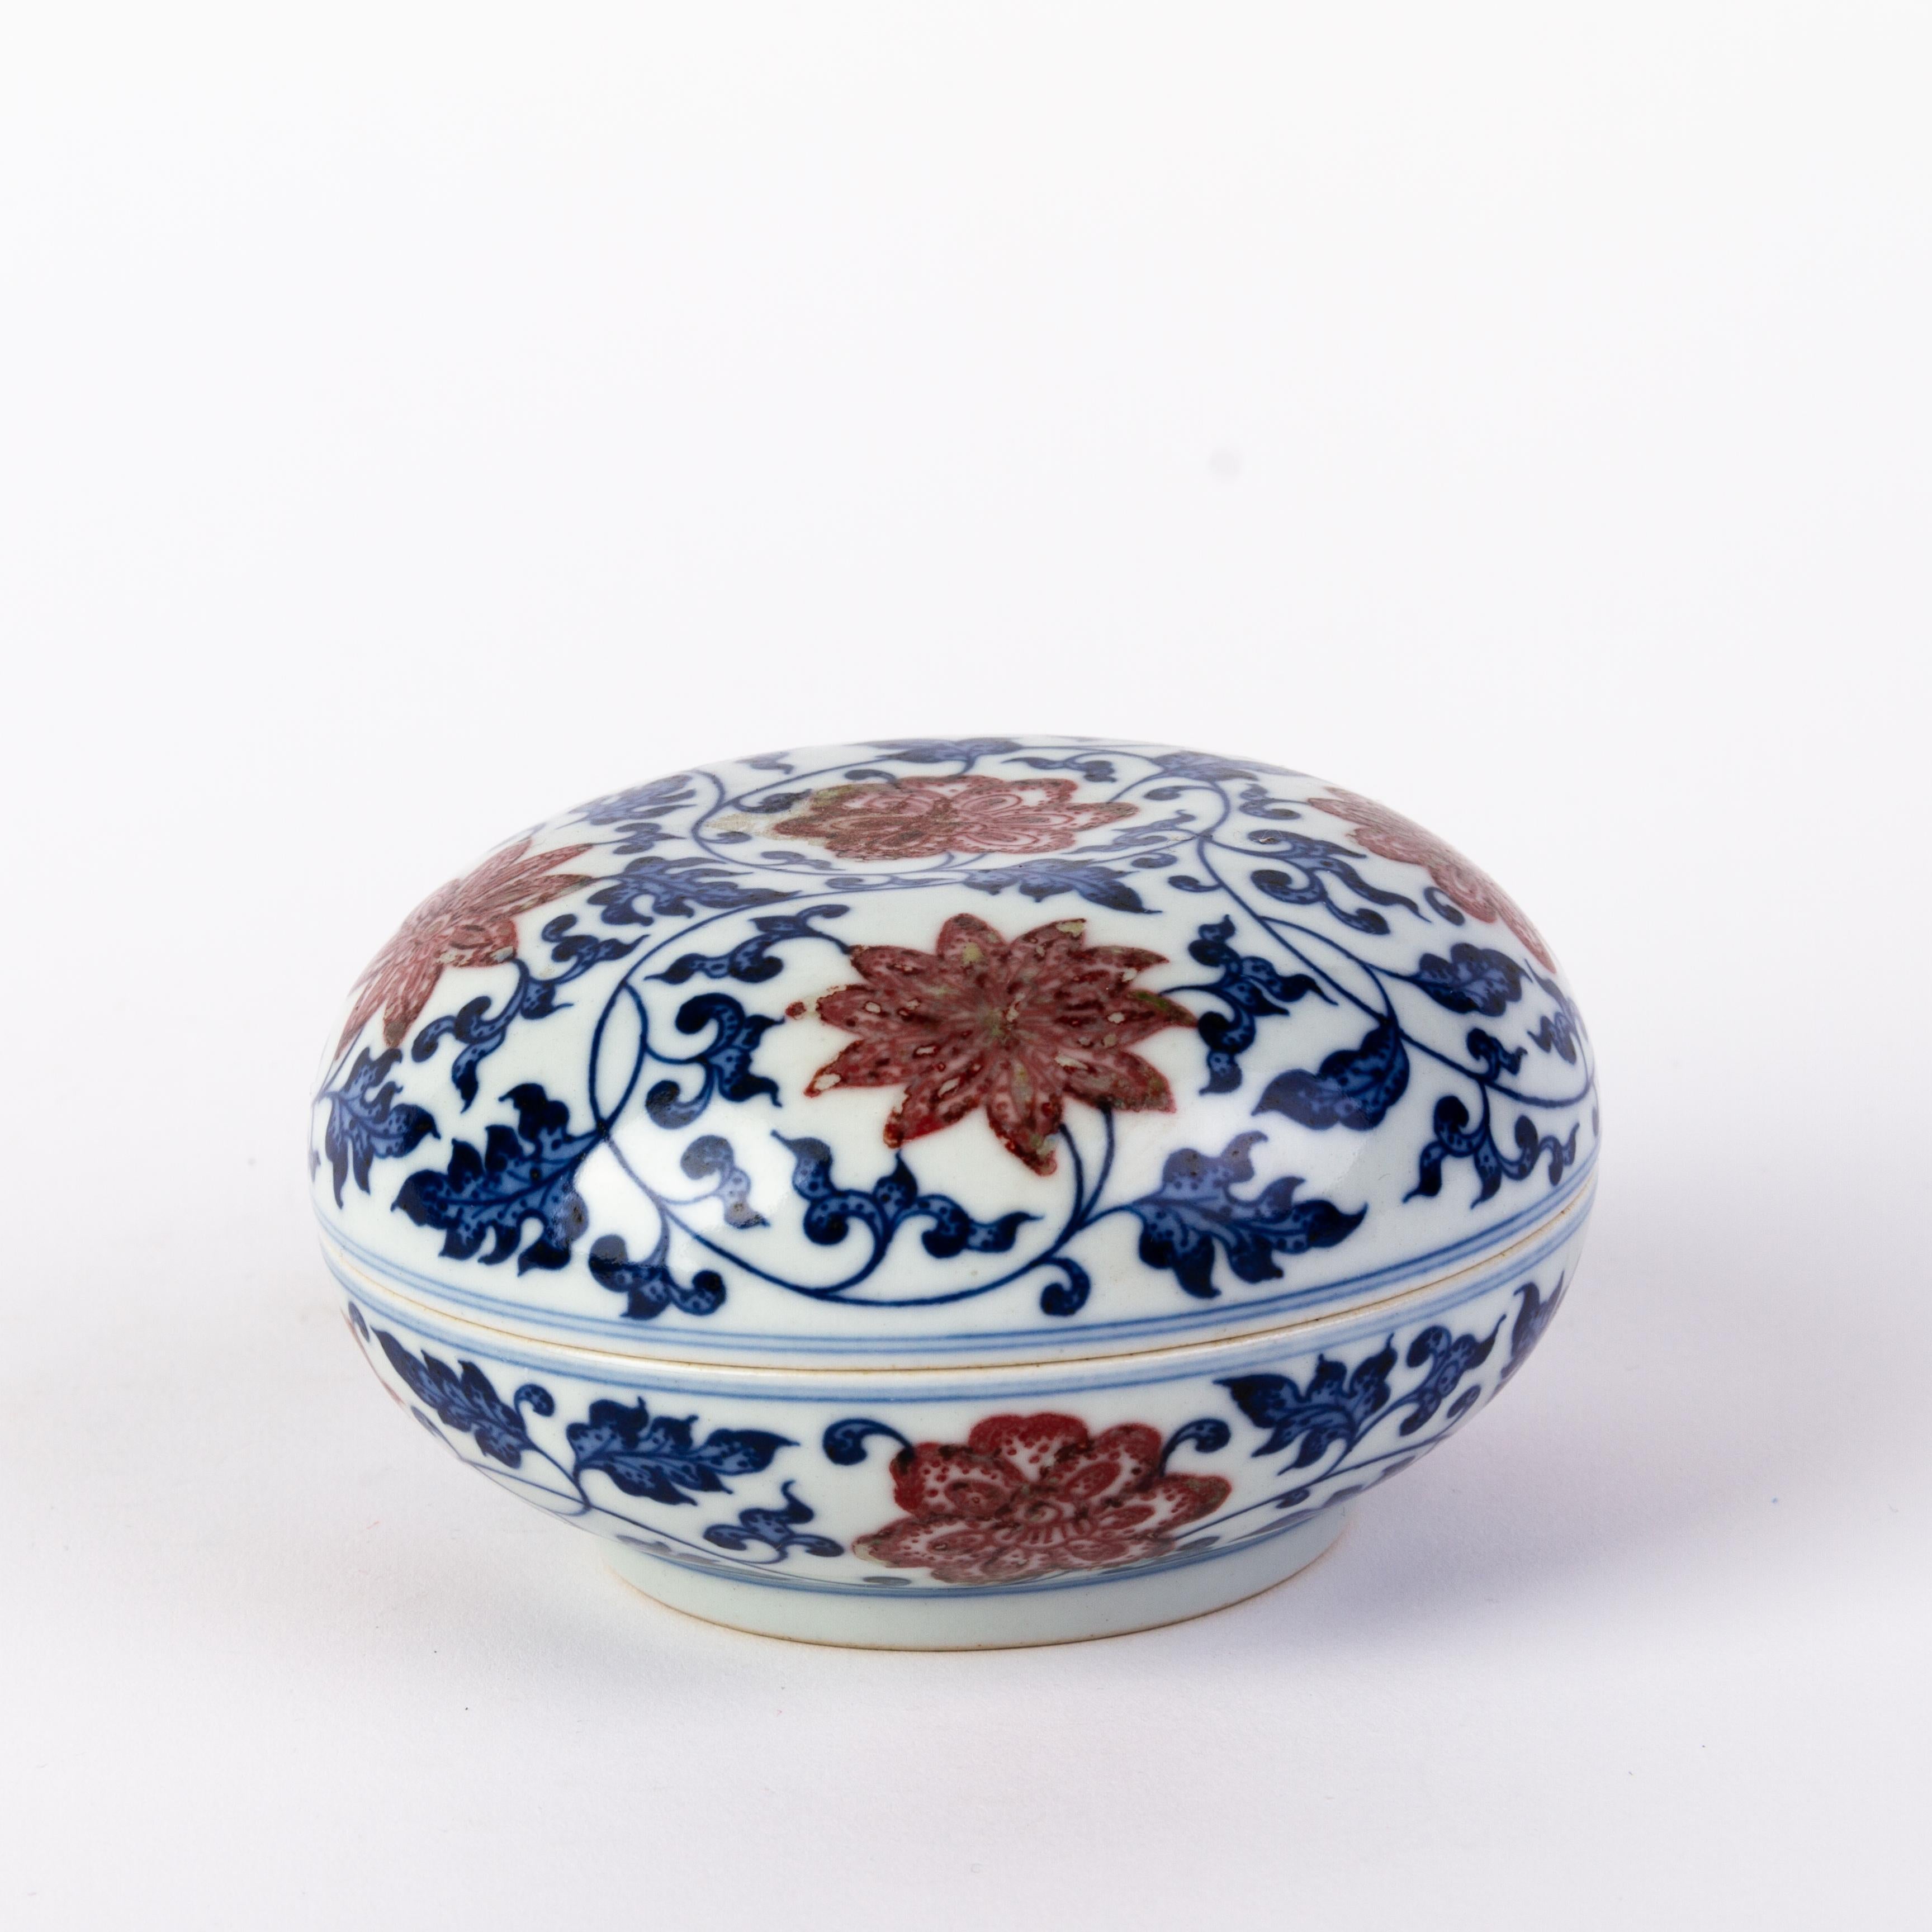 Chinese Qianlong Underglaze Red & Blue Porcelain Lotus Box 
Very good condition.
From a private collection.
Free international shipping.